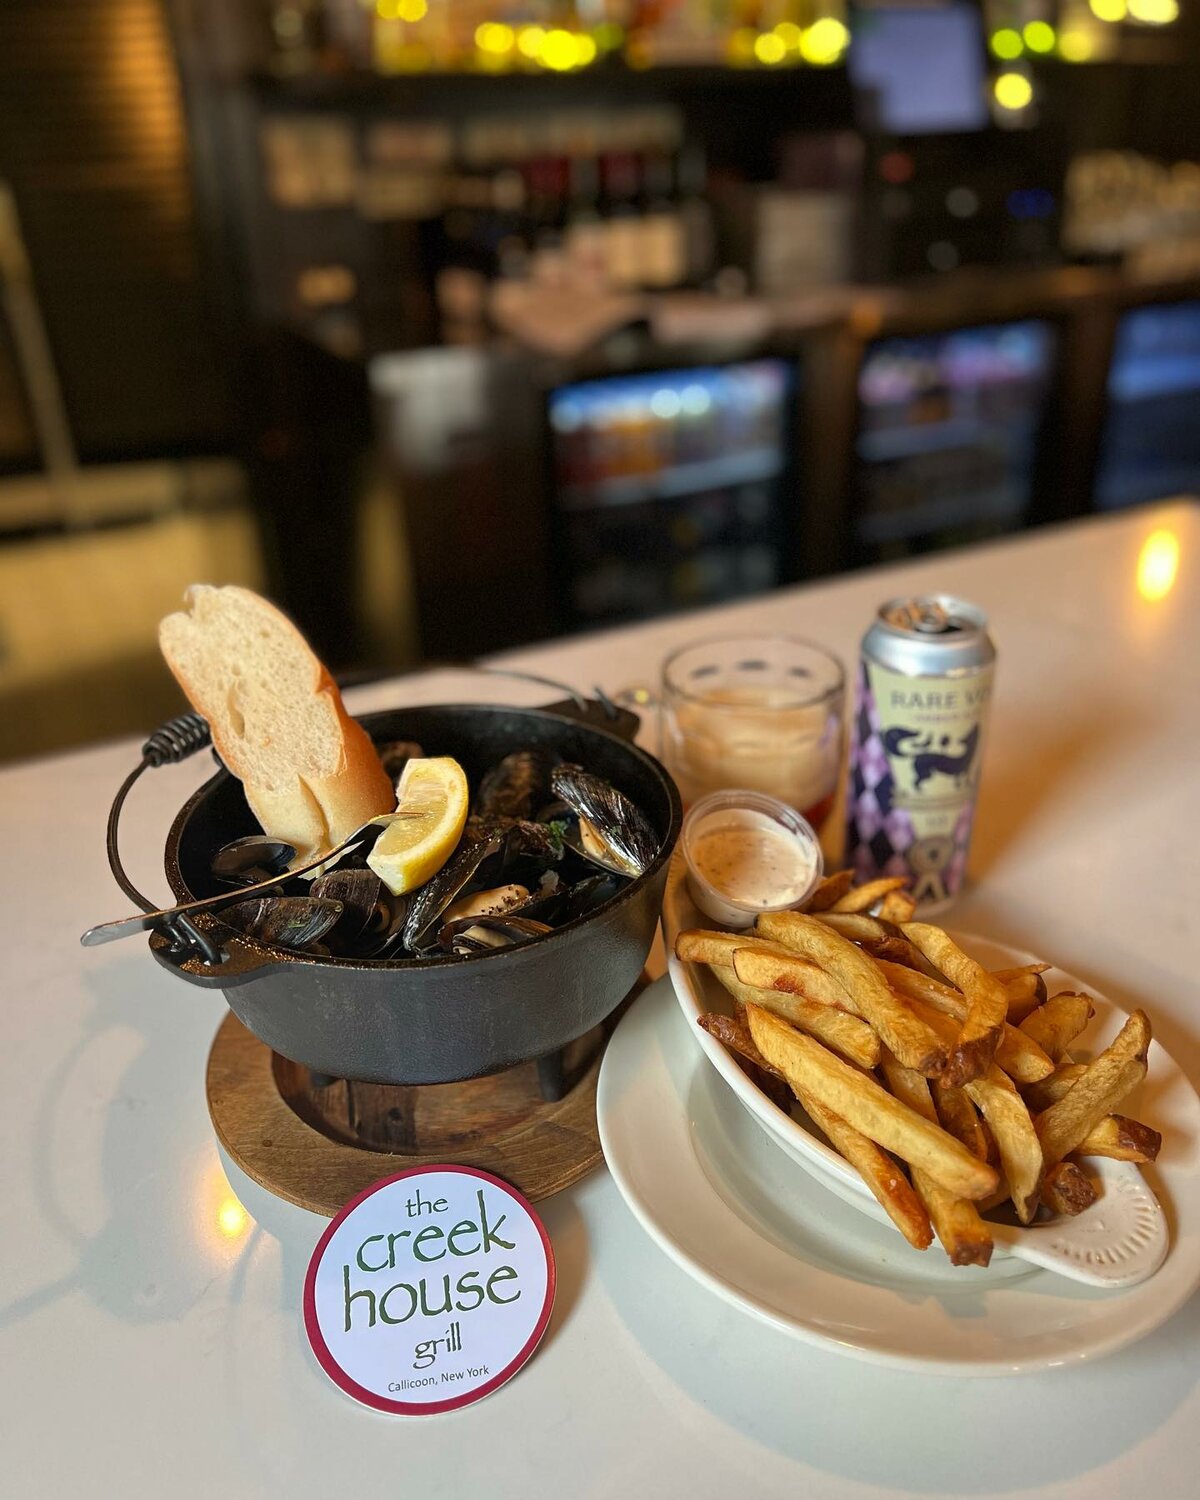 Mussels and fries.